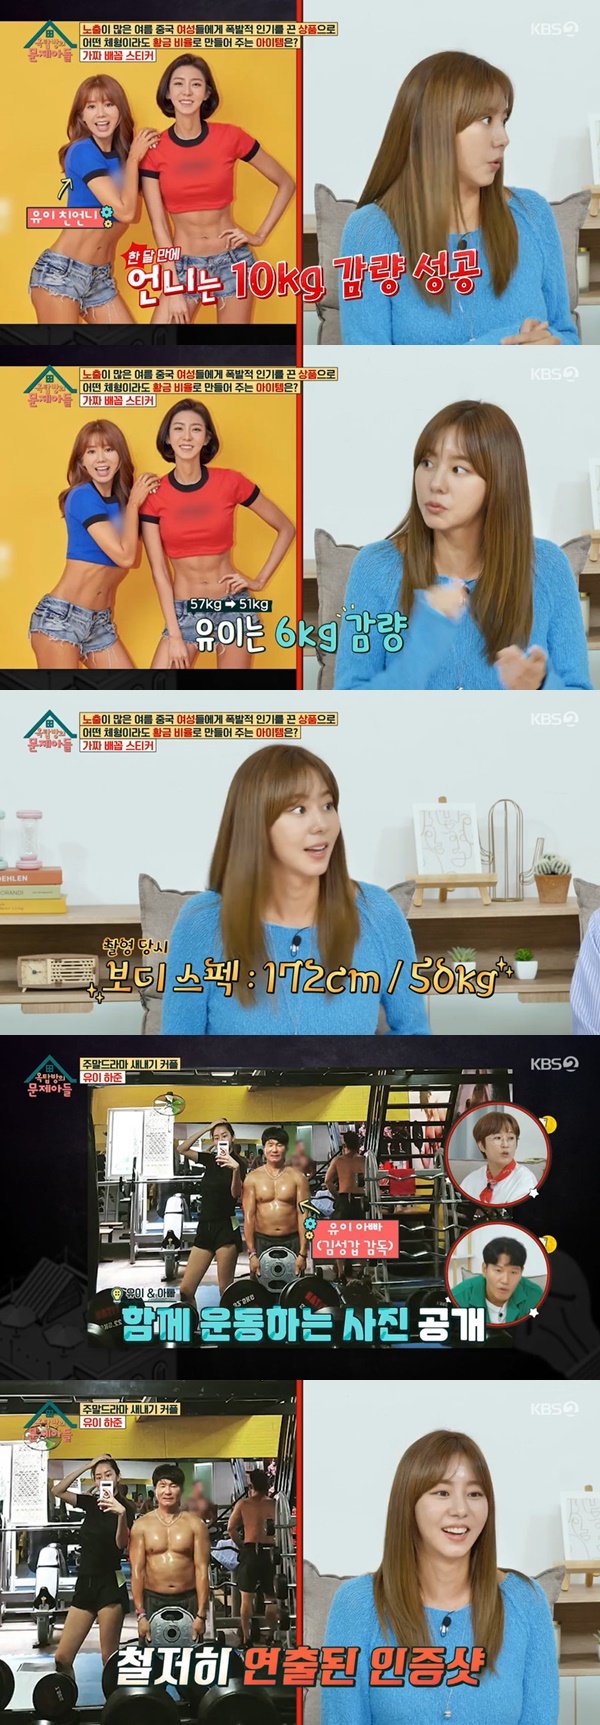 Uee also showed off Bodieprofile photos and boasted the extraordinary physicality of her sister and father.On September 13, KBS 2TV  ⁇  Problem Child in House  ⁇  appeared on the weekend drama couple Uee and Hajun.On the day of the broadcast, Uee unveiled a picture of Bodie profile, and he is next to him. Lets try Exercise, not beauty, once I see what my abs looks like. Bodie profile was contracted.My sister had postpartum depression, so I did it with her. My sister had a short period of time, but she swam with me, so I lost 10kg in a month. I lost 6kg, she said.At that time, Uees body was 172 cm tall and weighed 50 kg. When Kim Jong-kook predicted a single-digit body fat percentage, Uee touched the photo slightly and confessed that the body fat rate was about 13% and 14%.Uee also said that his father, Kim Seong-gap, was doing Exercise with him.  ⁇ Father retired for a while. He often went to Vietnam with his mother when he was resting.When my father was Exercise, I followed him and went to the gym together for a month in Vietnam. It was different when I learned from Exercise.